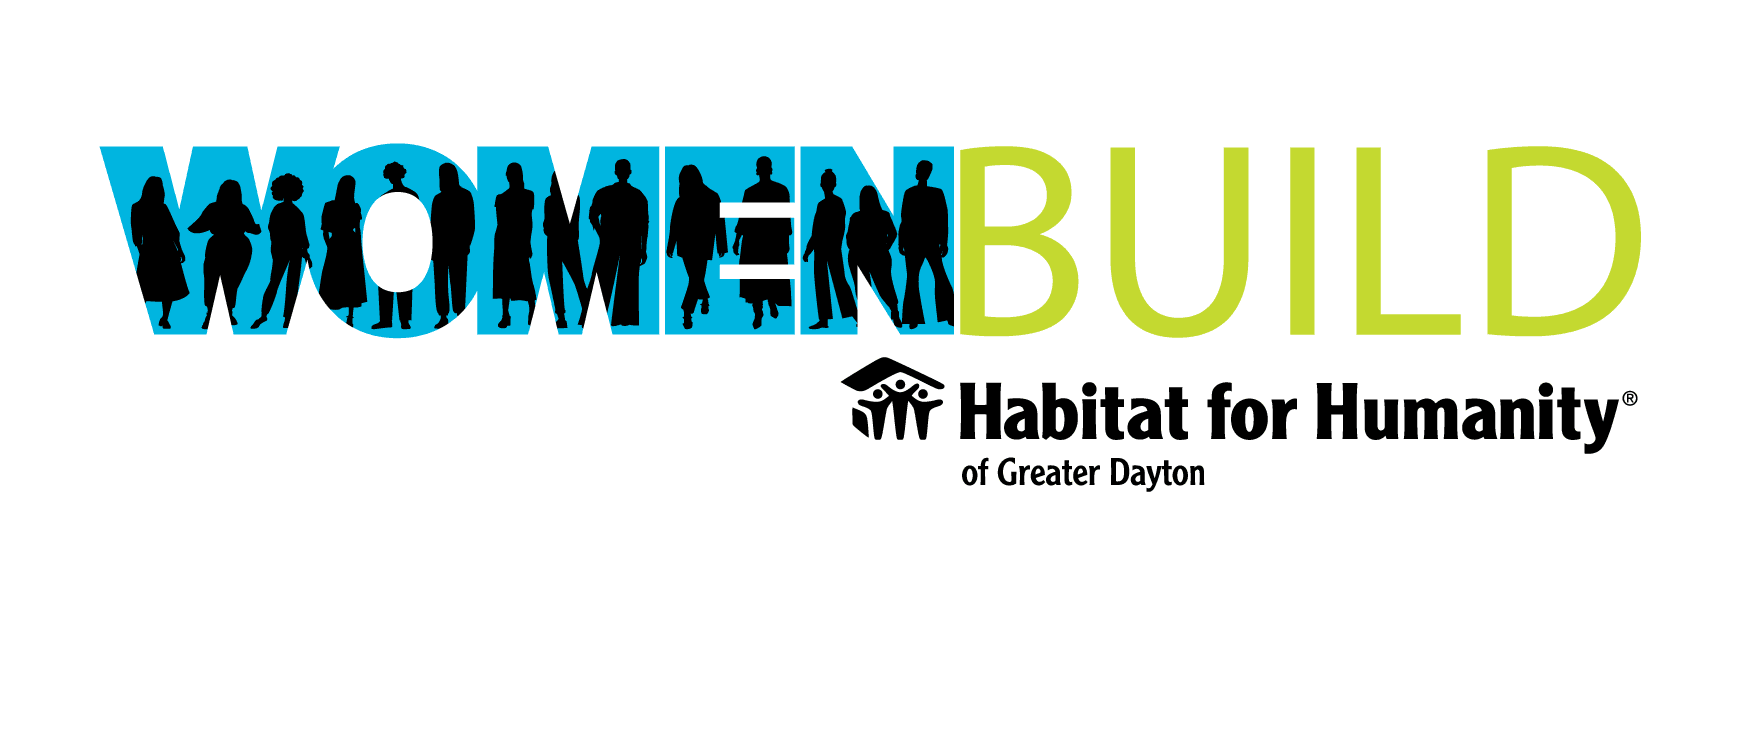 Women of Dayton, are you ready to build a future?